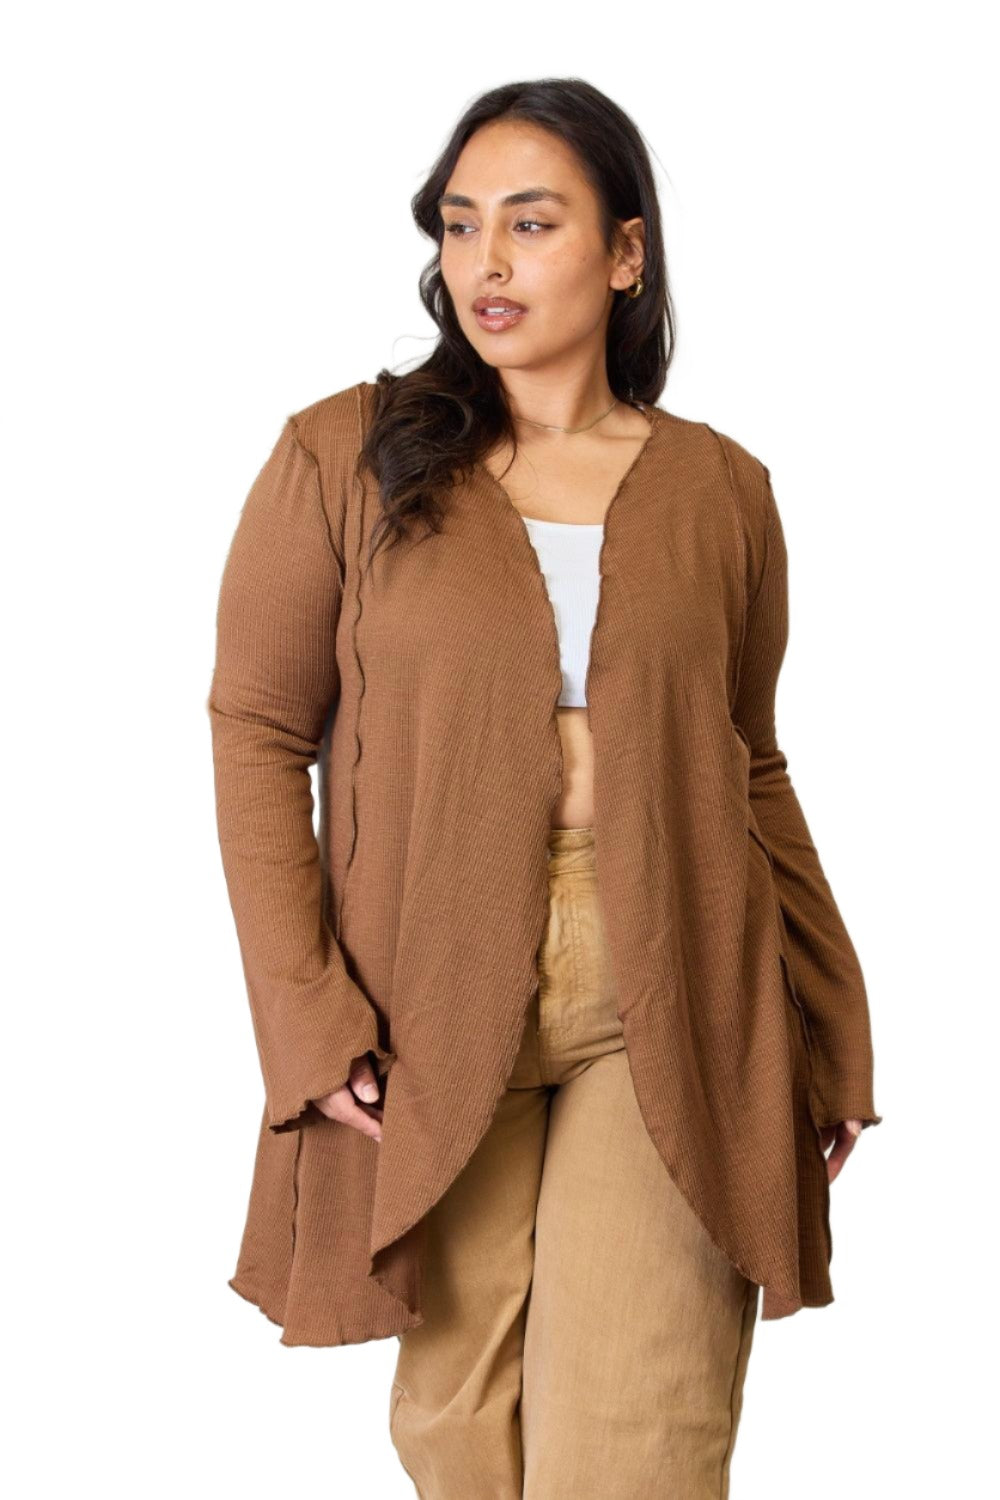 Women's Sweaters - Cardigans Culture Code Full Size Open Front Long Sleeve Cardigan